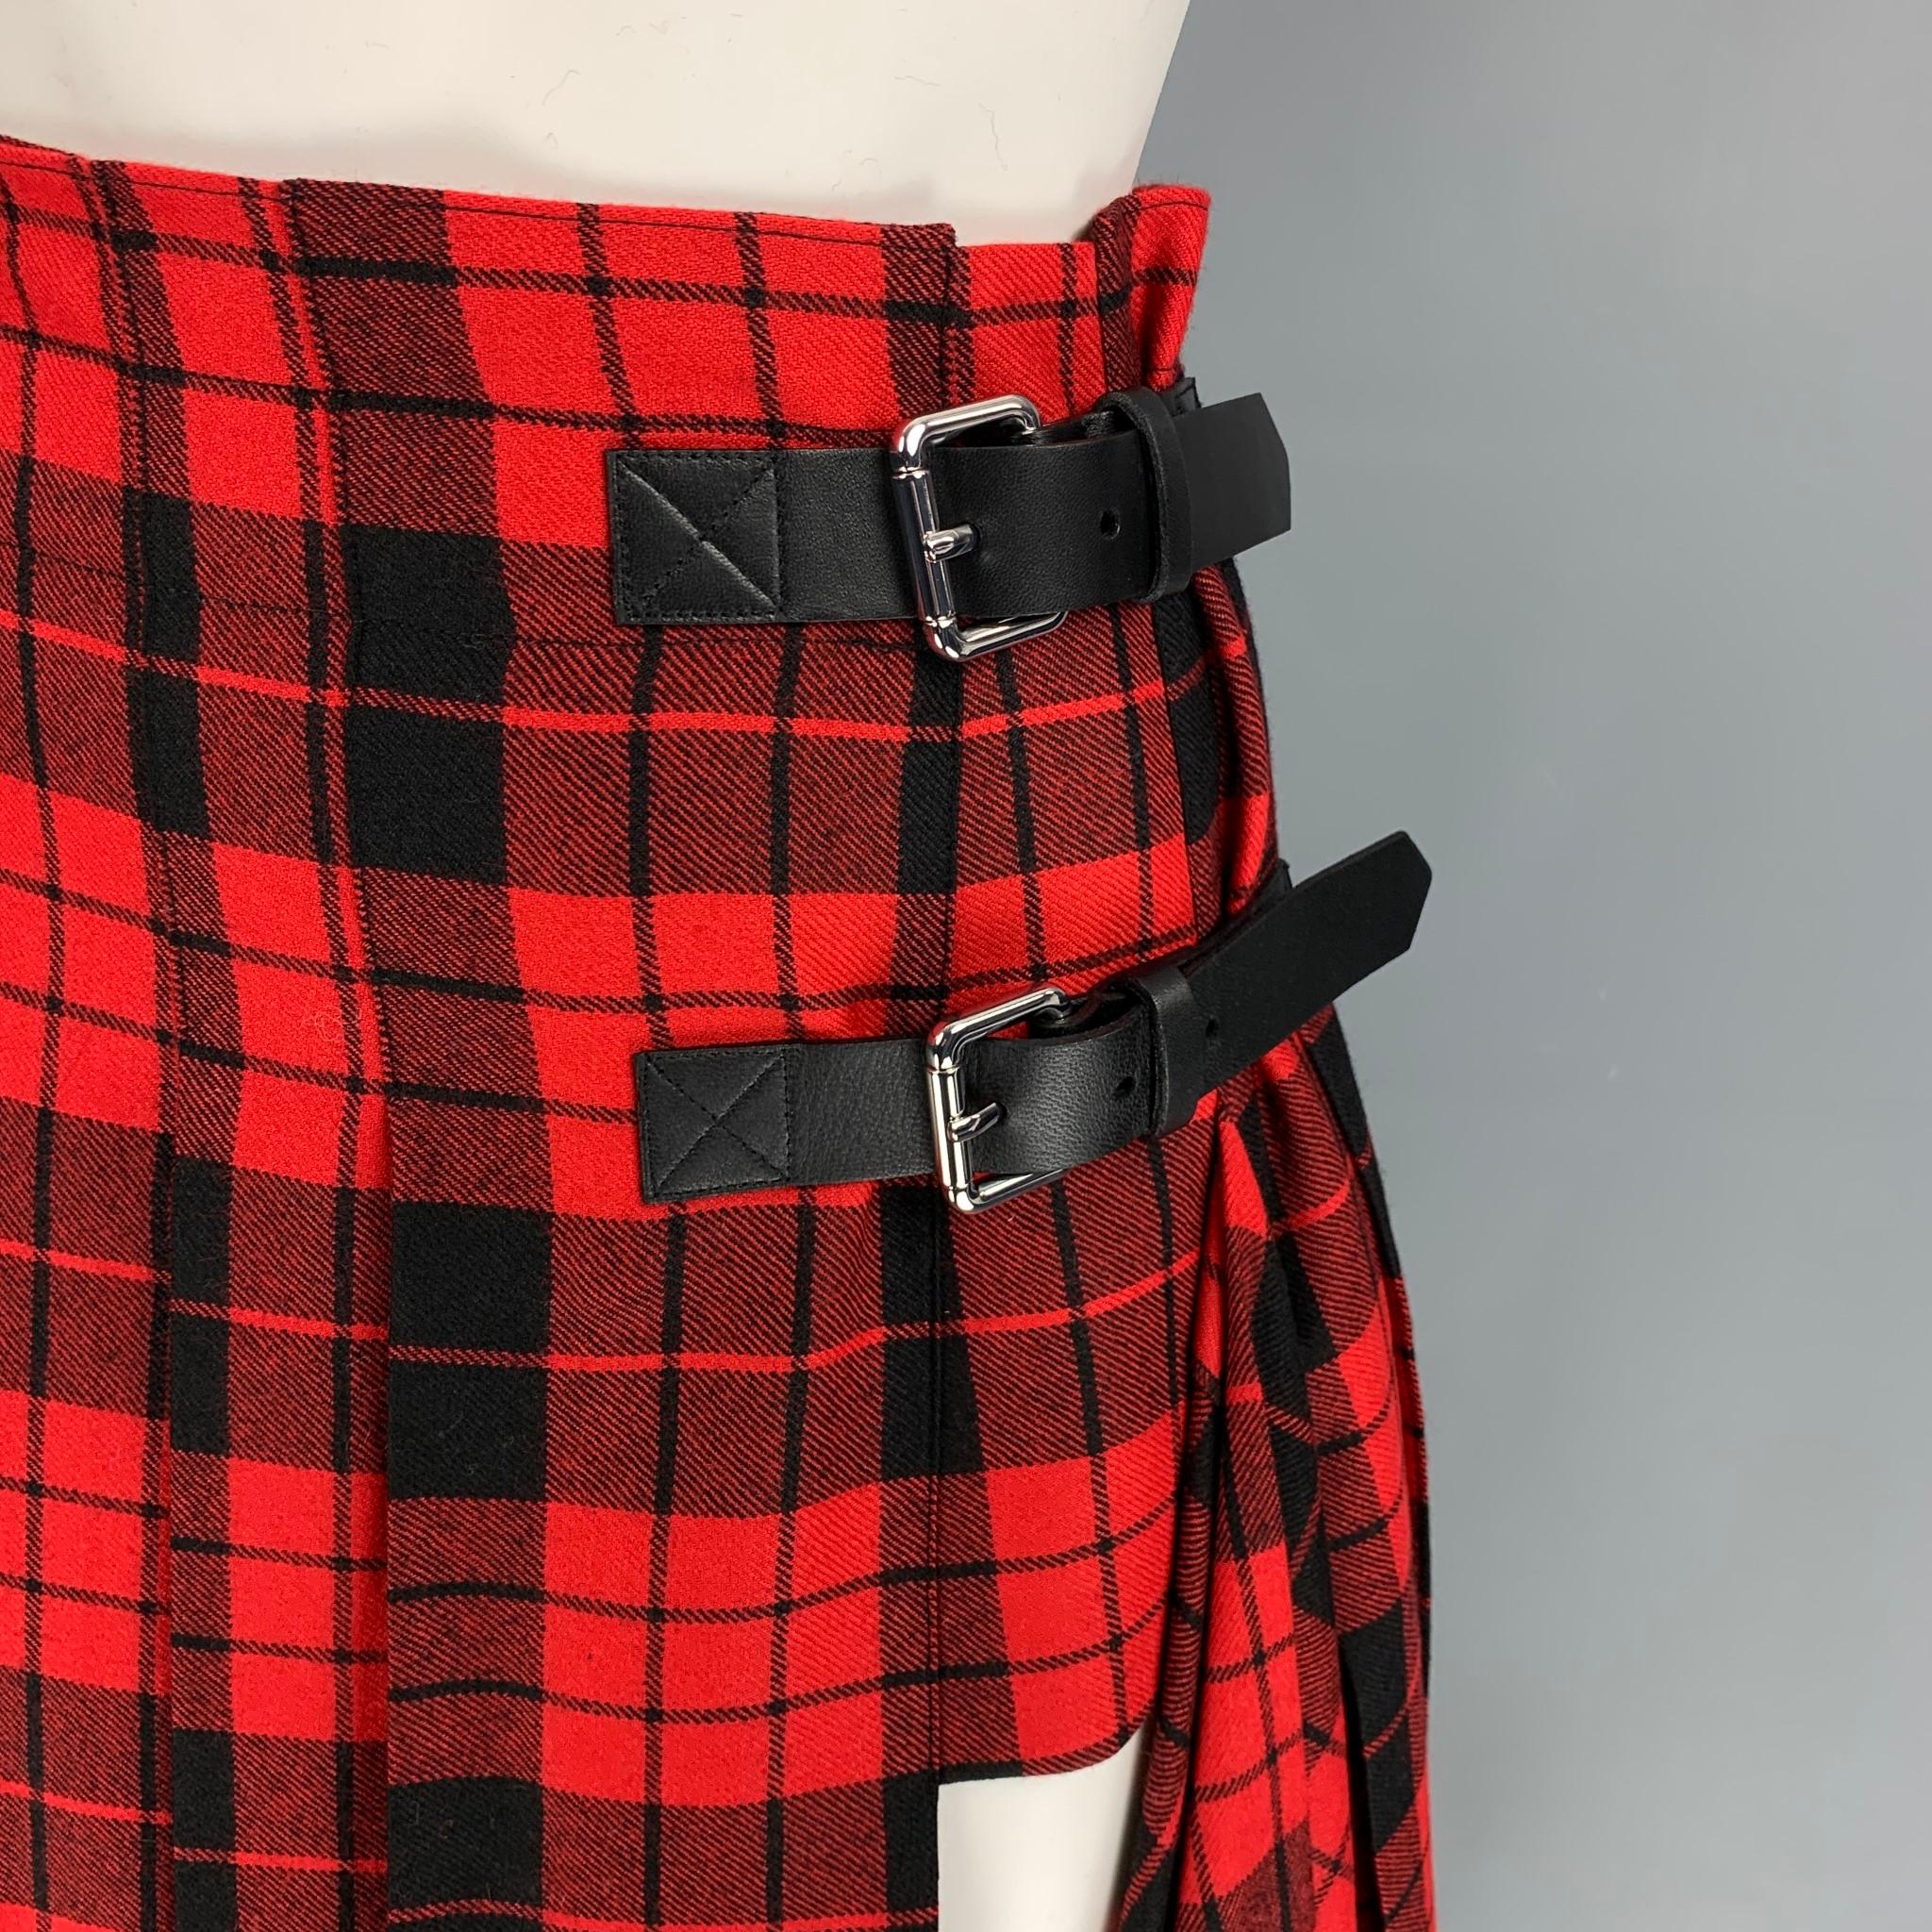 MONSE skirt comes ina  red & black plaid wool with a slip liner featuring a pleated style, front slit, side zipper,and a double leather buckle closure. 

New With Tags. 
Marked: 0
Original Retail Price: $1,395.00

Measurements:

Waist: 28 in.
Hip: